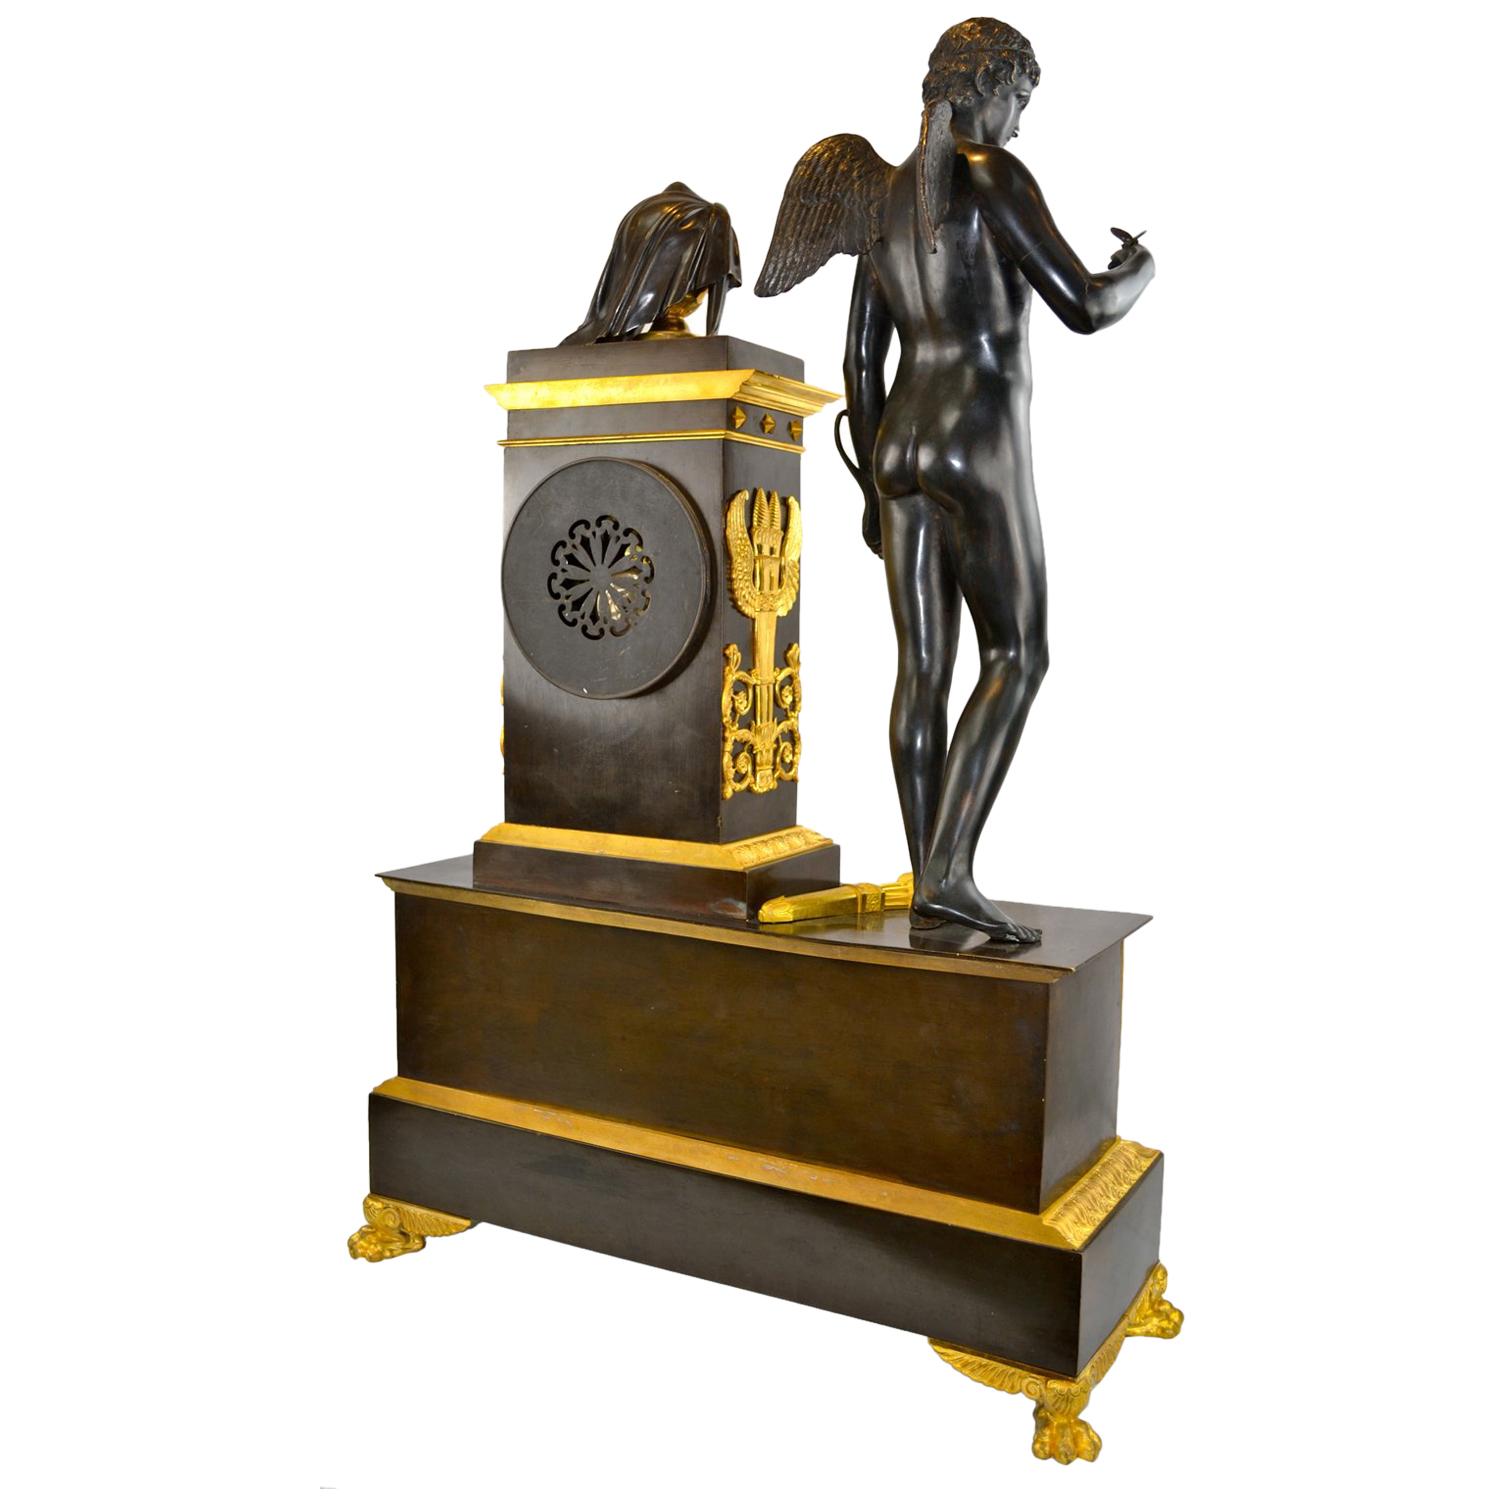 A palatial scale late French Empire mantel (fireplace) clock depicting cupid and Eurydice. The rectangular patinated bronze base sits on four lions paw feet and has a gilded frieze across the entire front depicting scenes of the story of Orpheus and